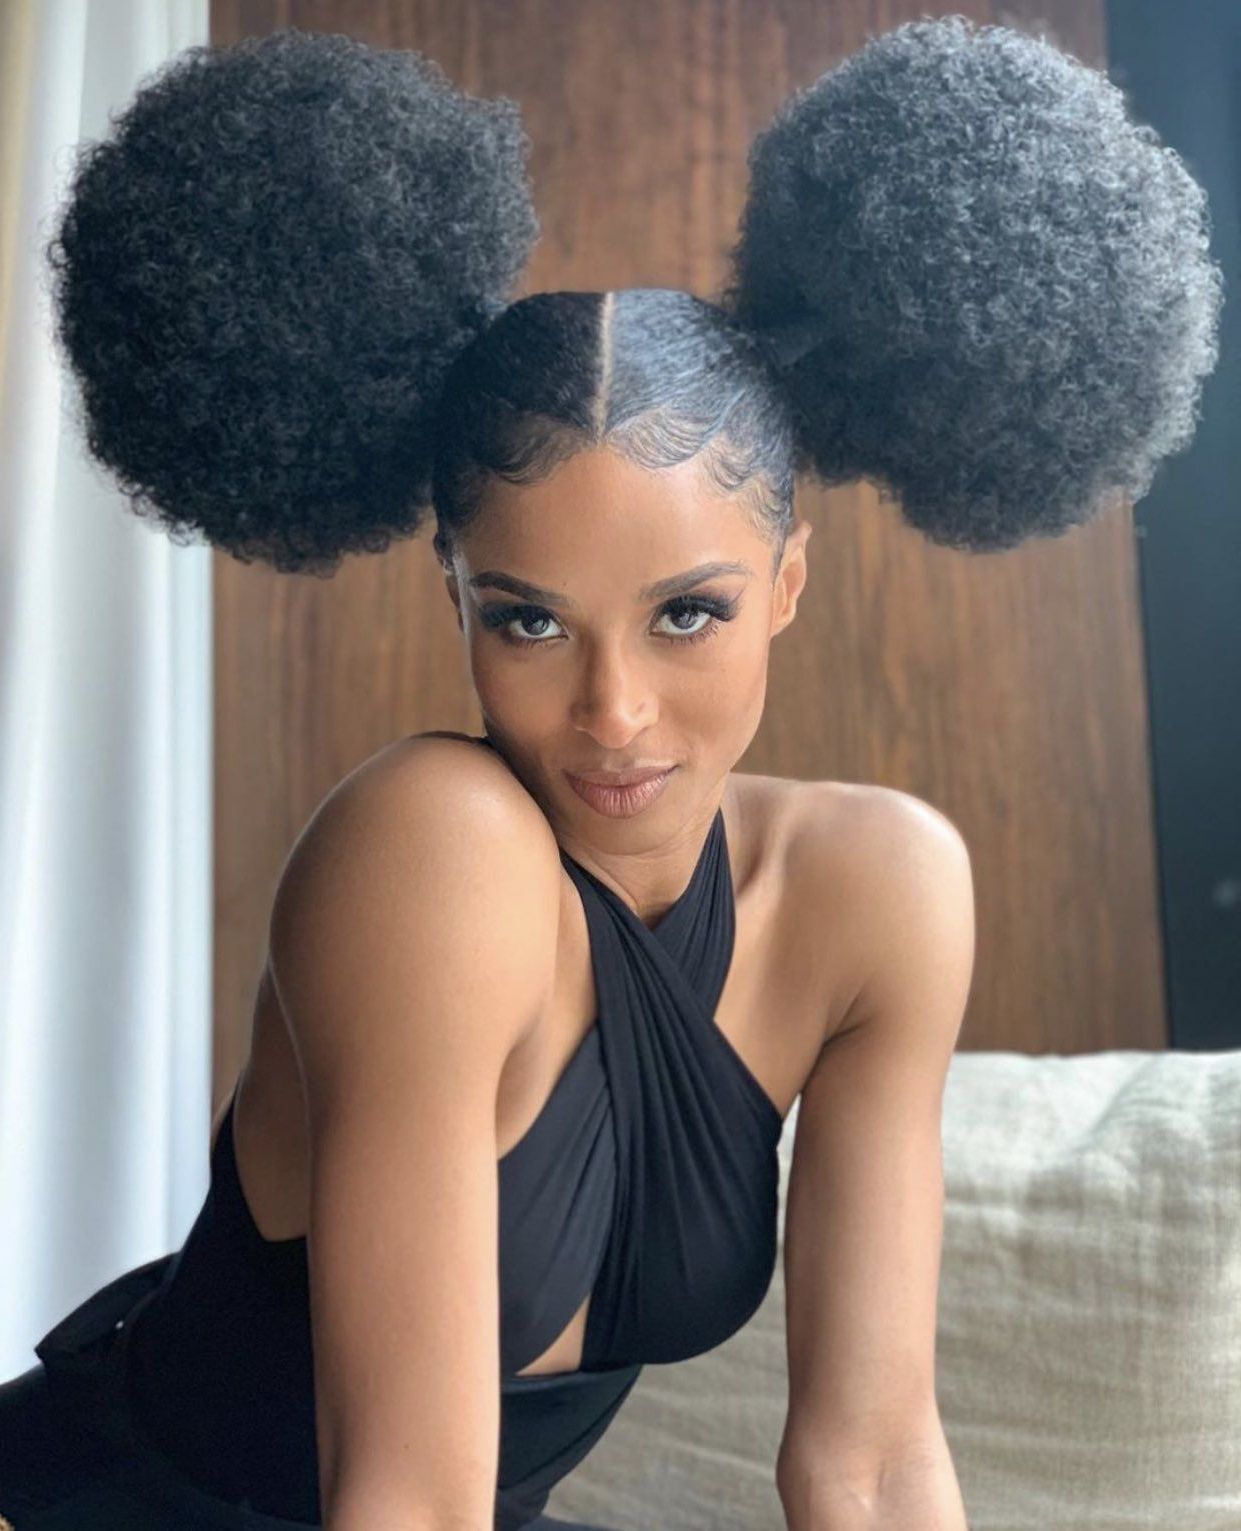 Ciara Rocking Her Side Puffs 😍😍 (View 10 of 20)